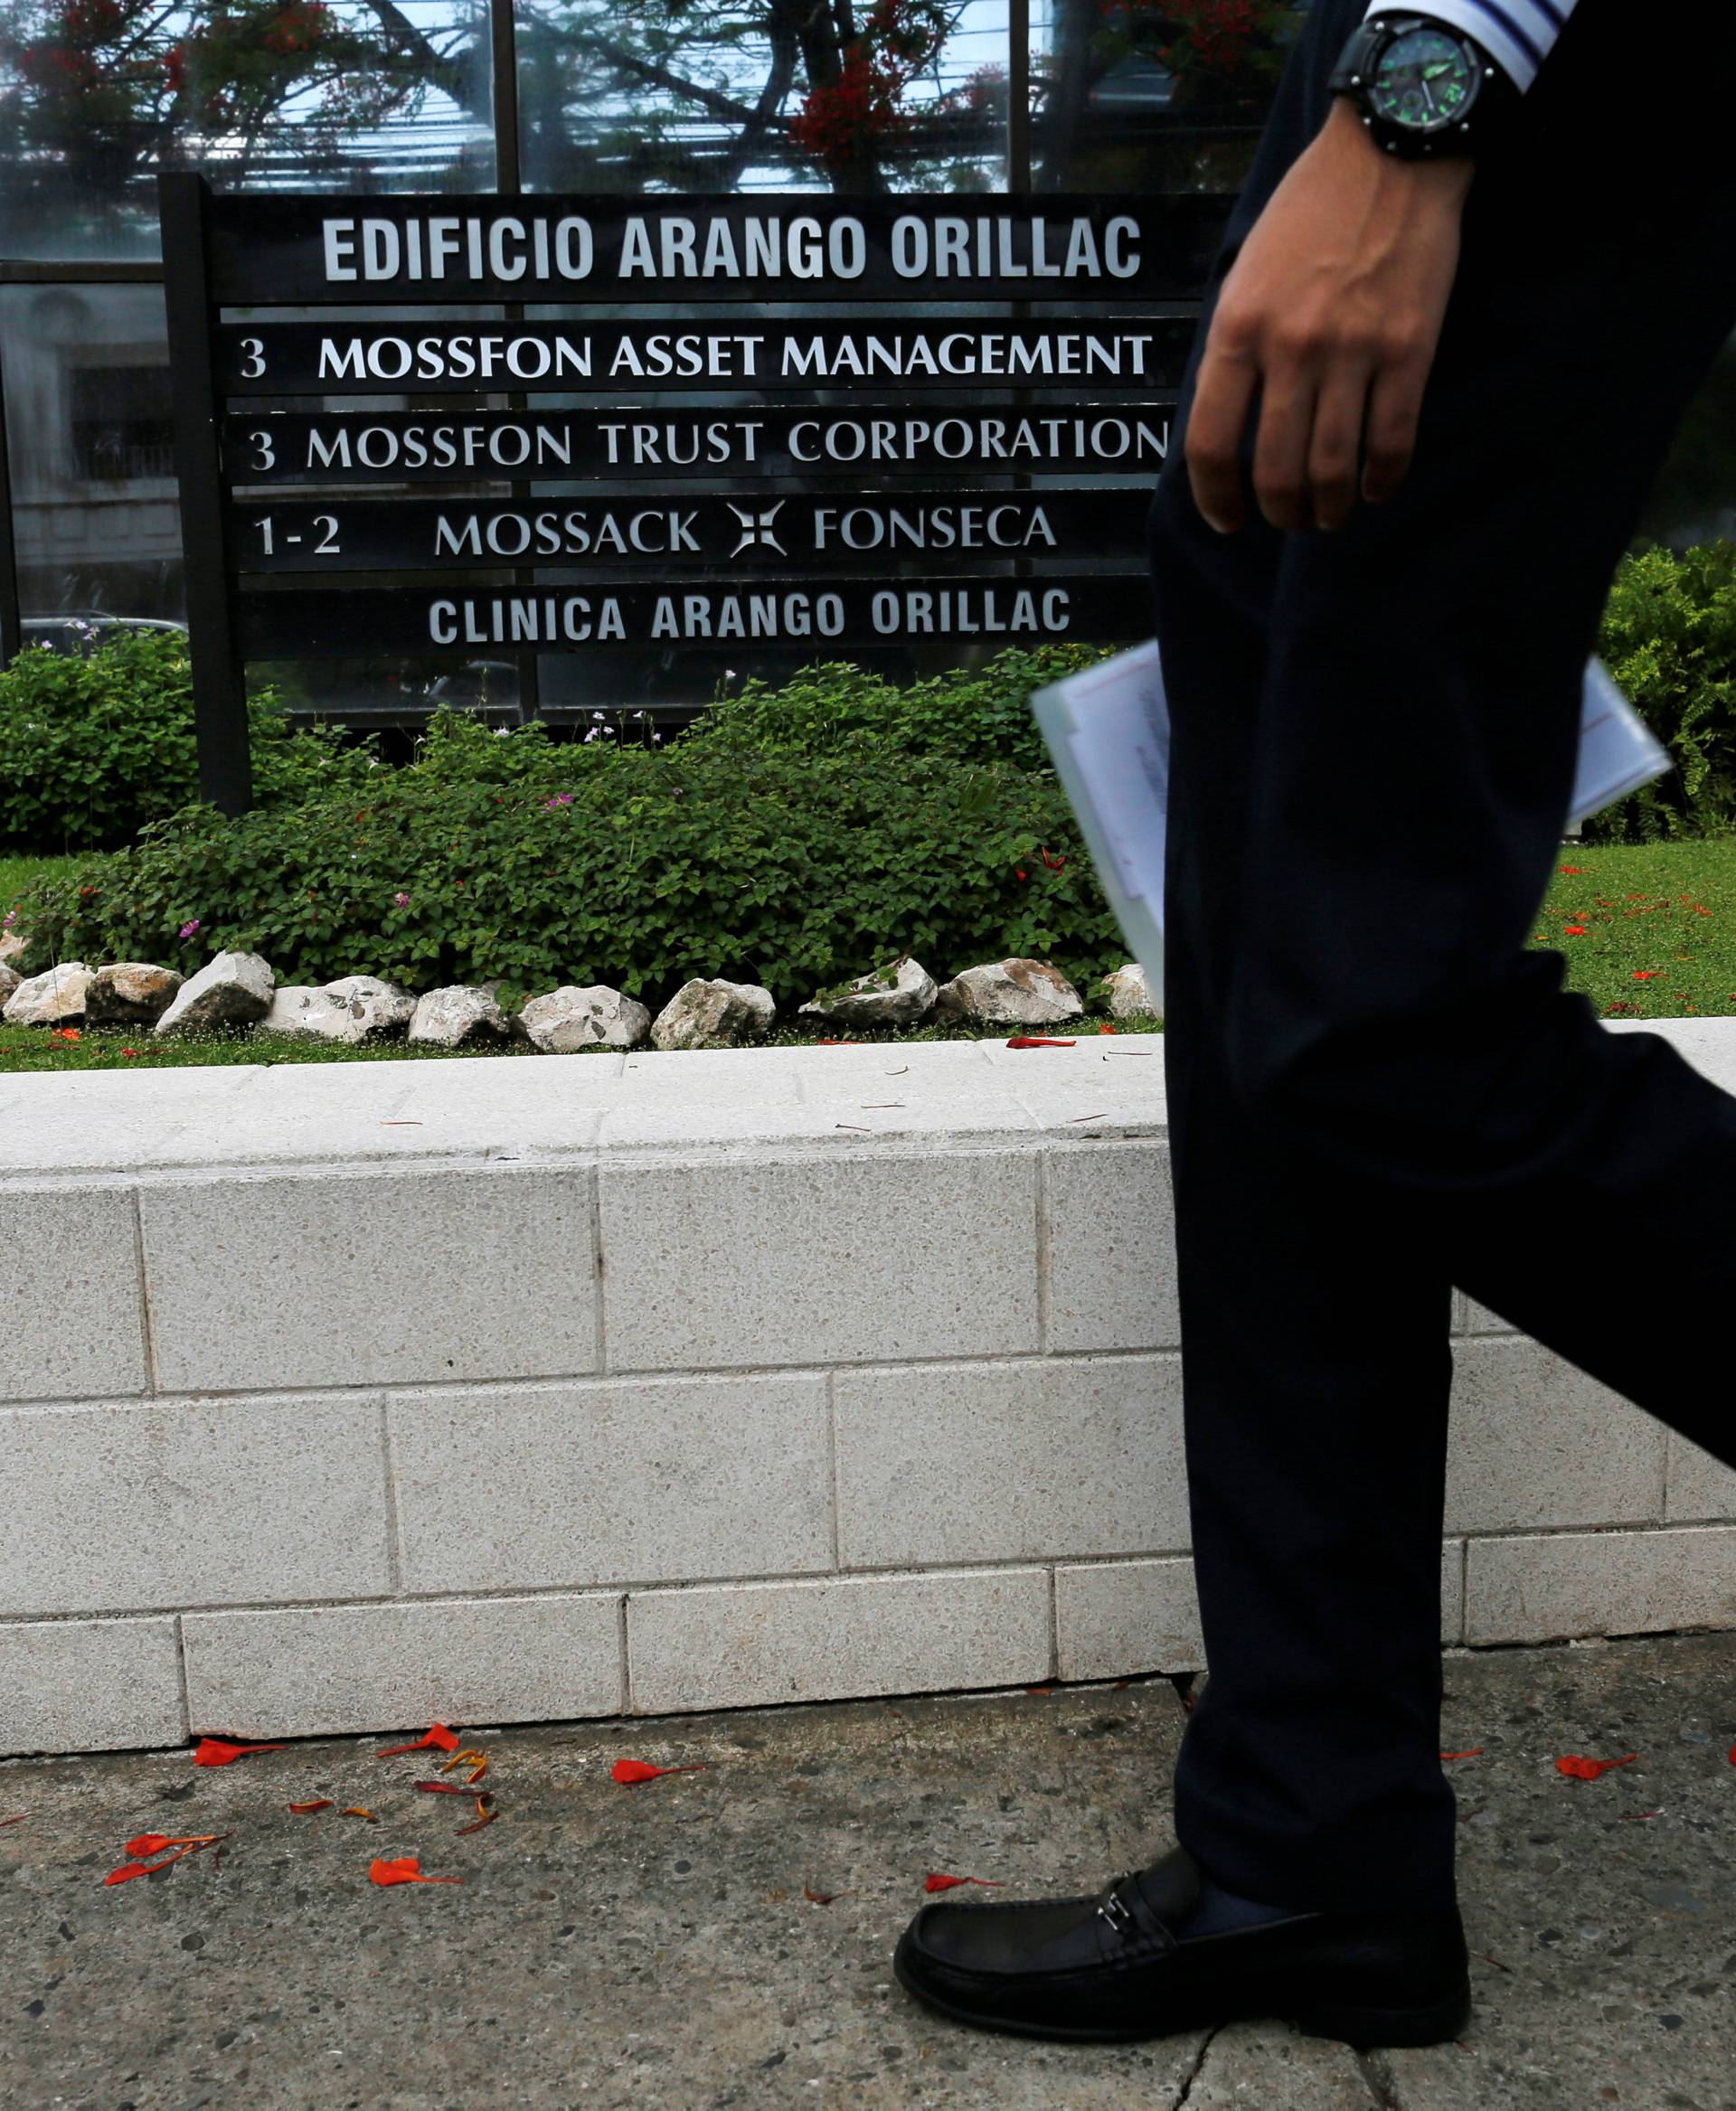 A man walks past a company list showing the Mossack Fonseca law firm at the Arango Orillac Building in Panama City